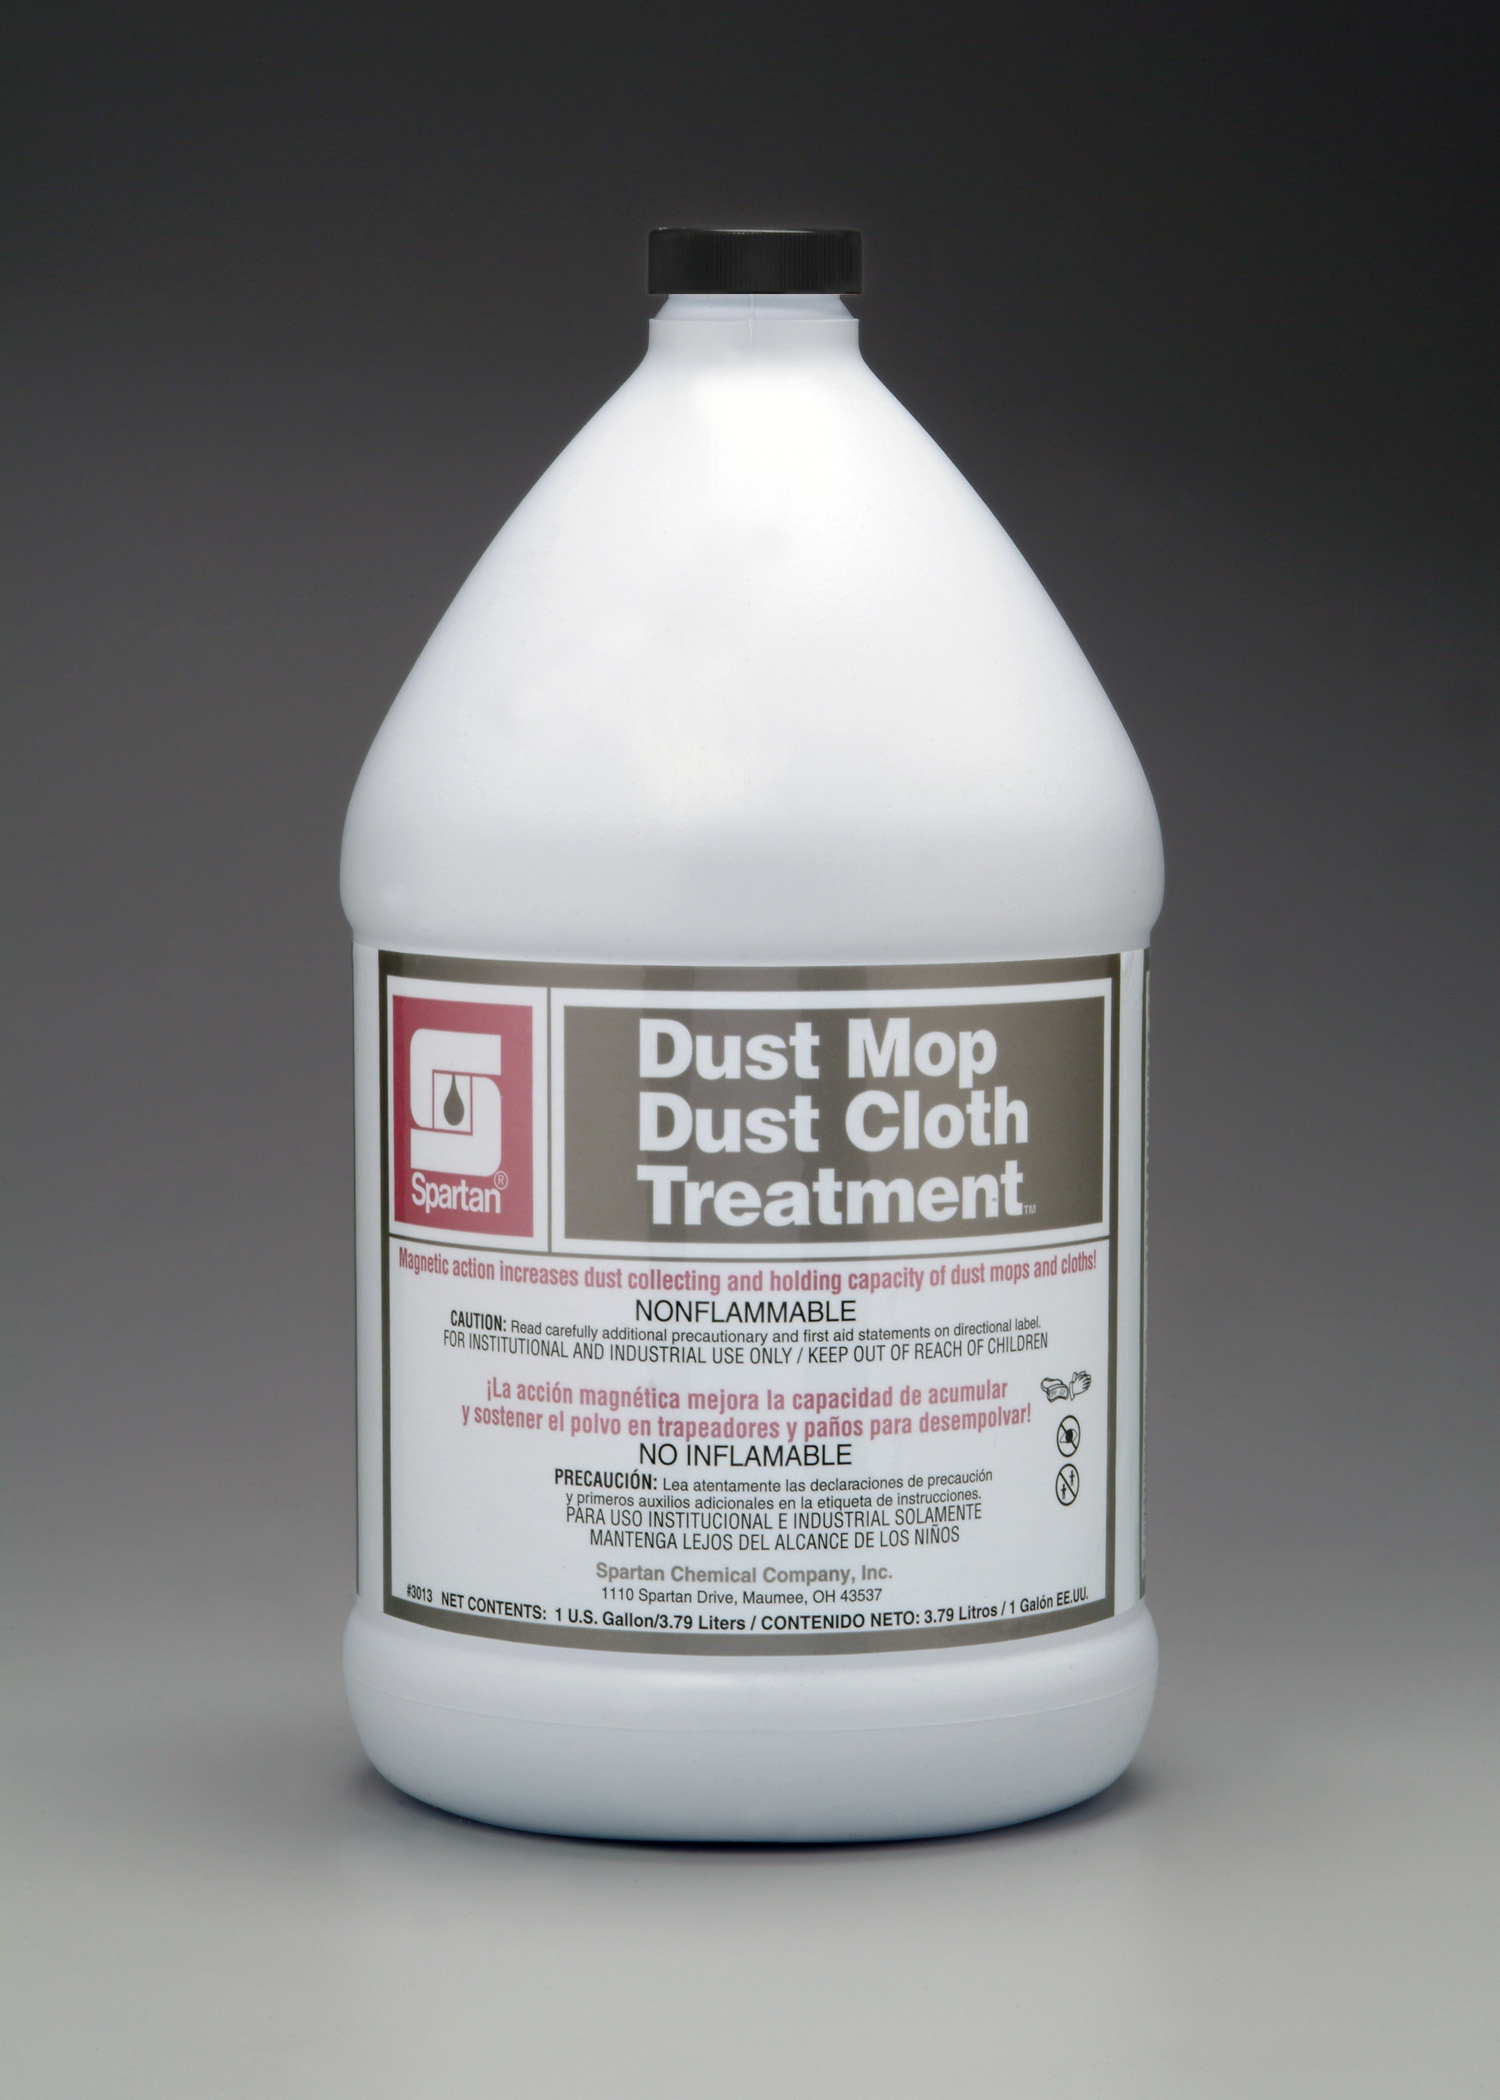 Dust mop/dust cloth treatment that cleans safely without oily residue